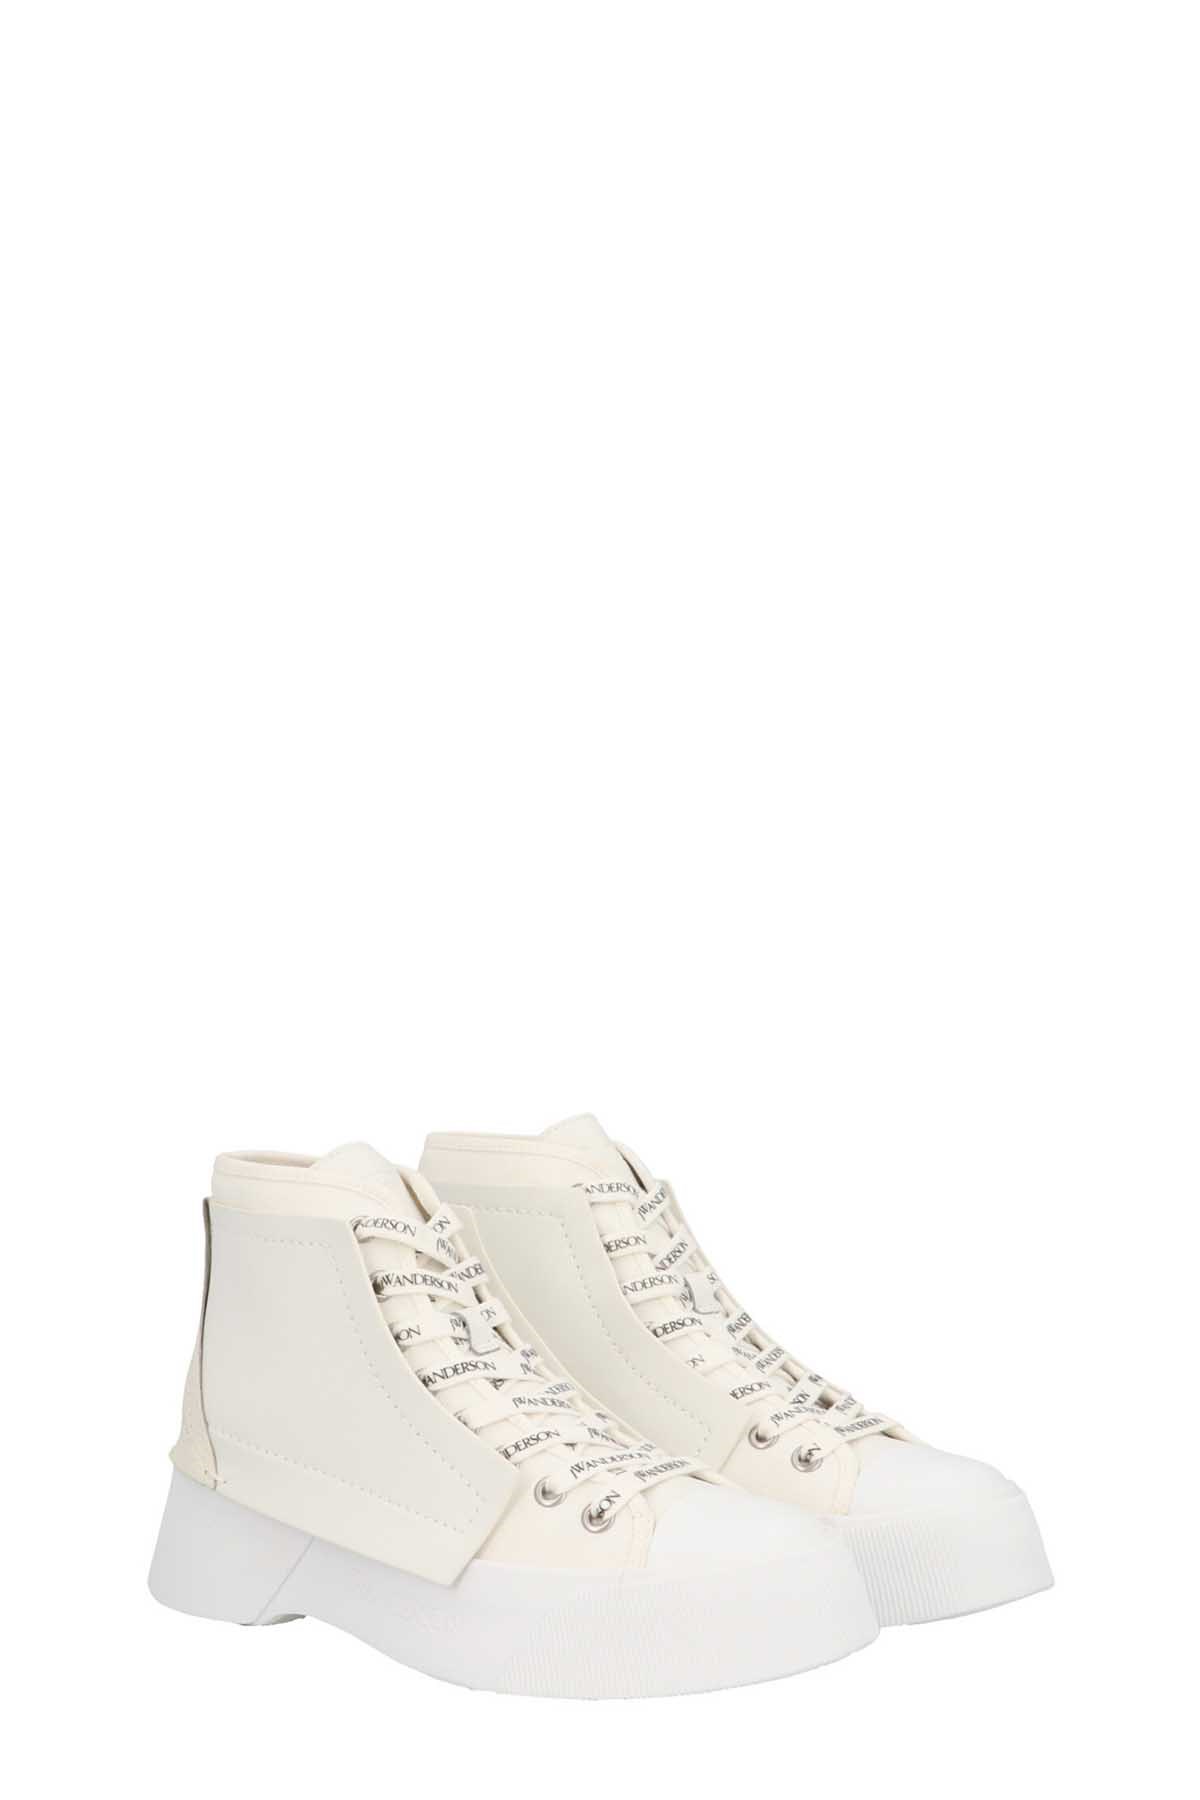 J.W.ANDERSON High-Top-Sneakers 'Trainer'